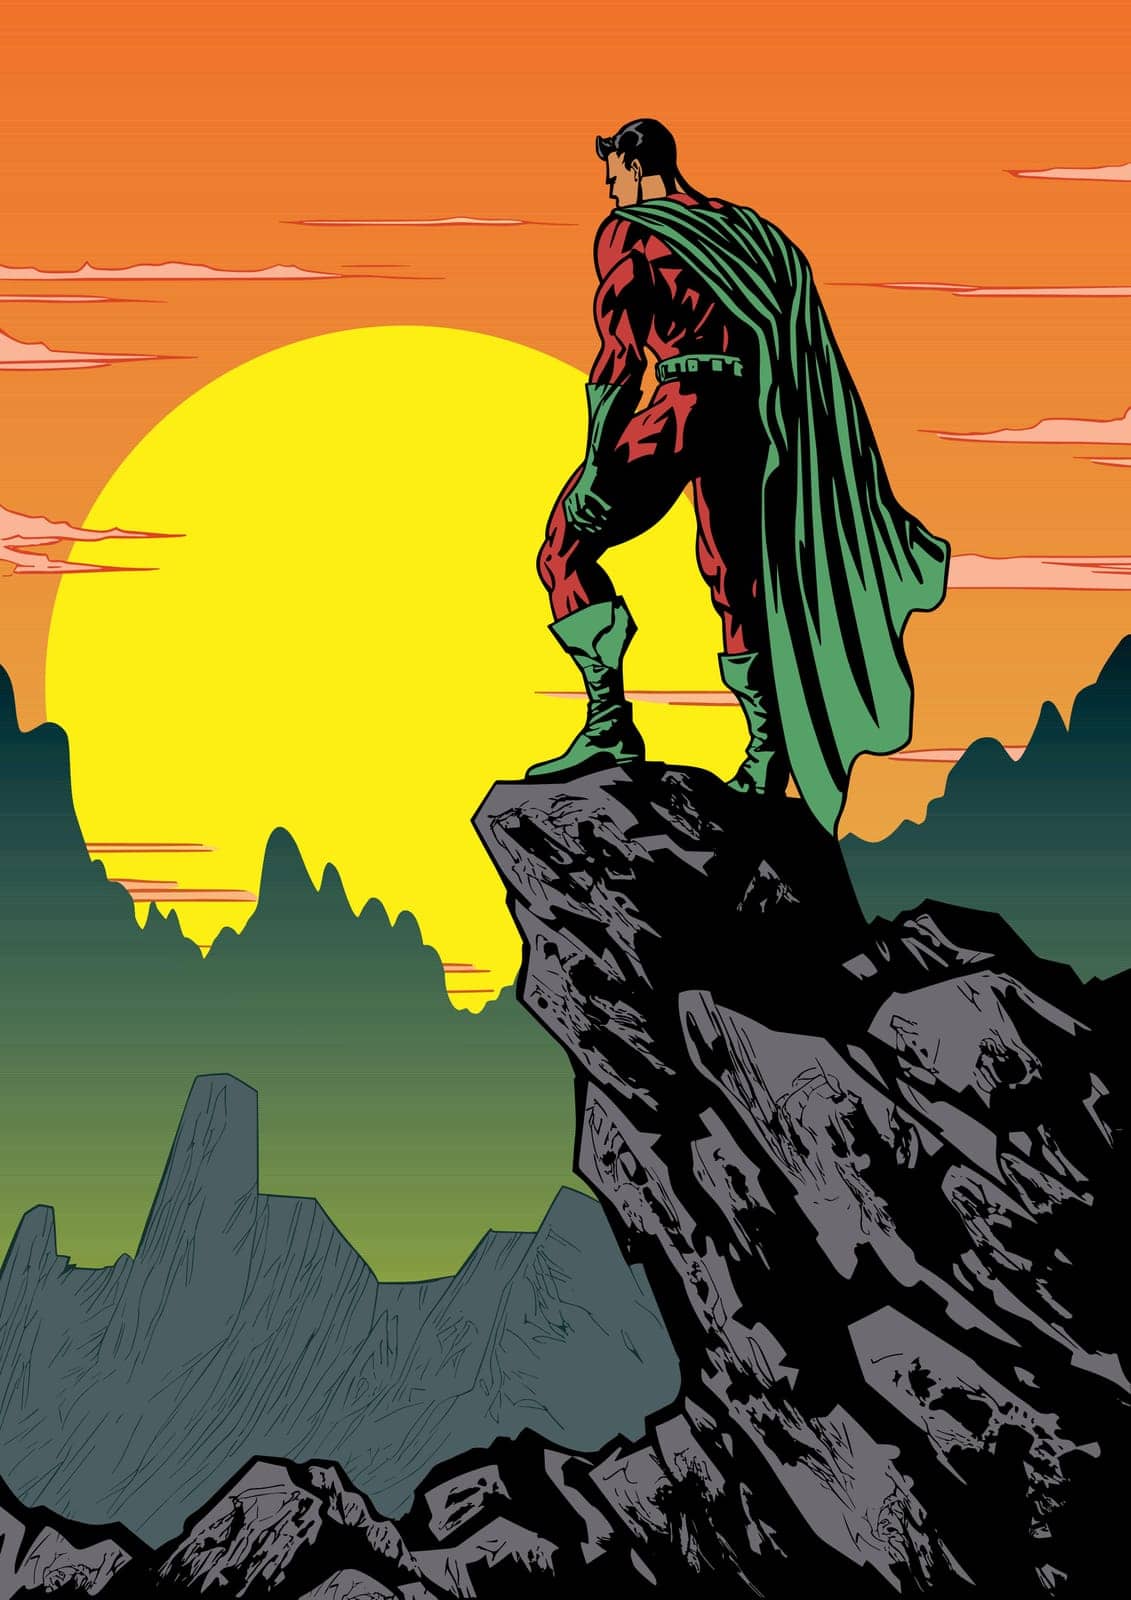 Comic book style superhero standing on the edge of a cliff, looking down and reminiscing during sunset.